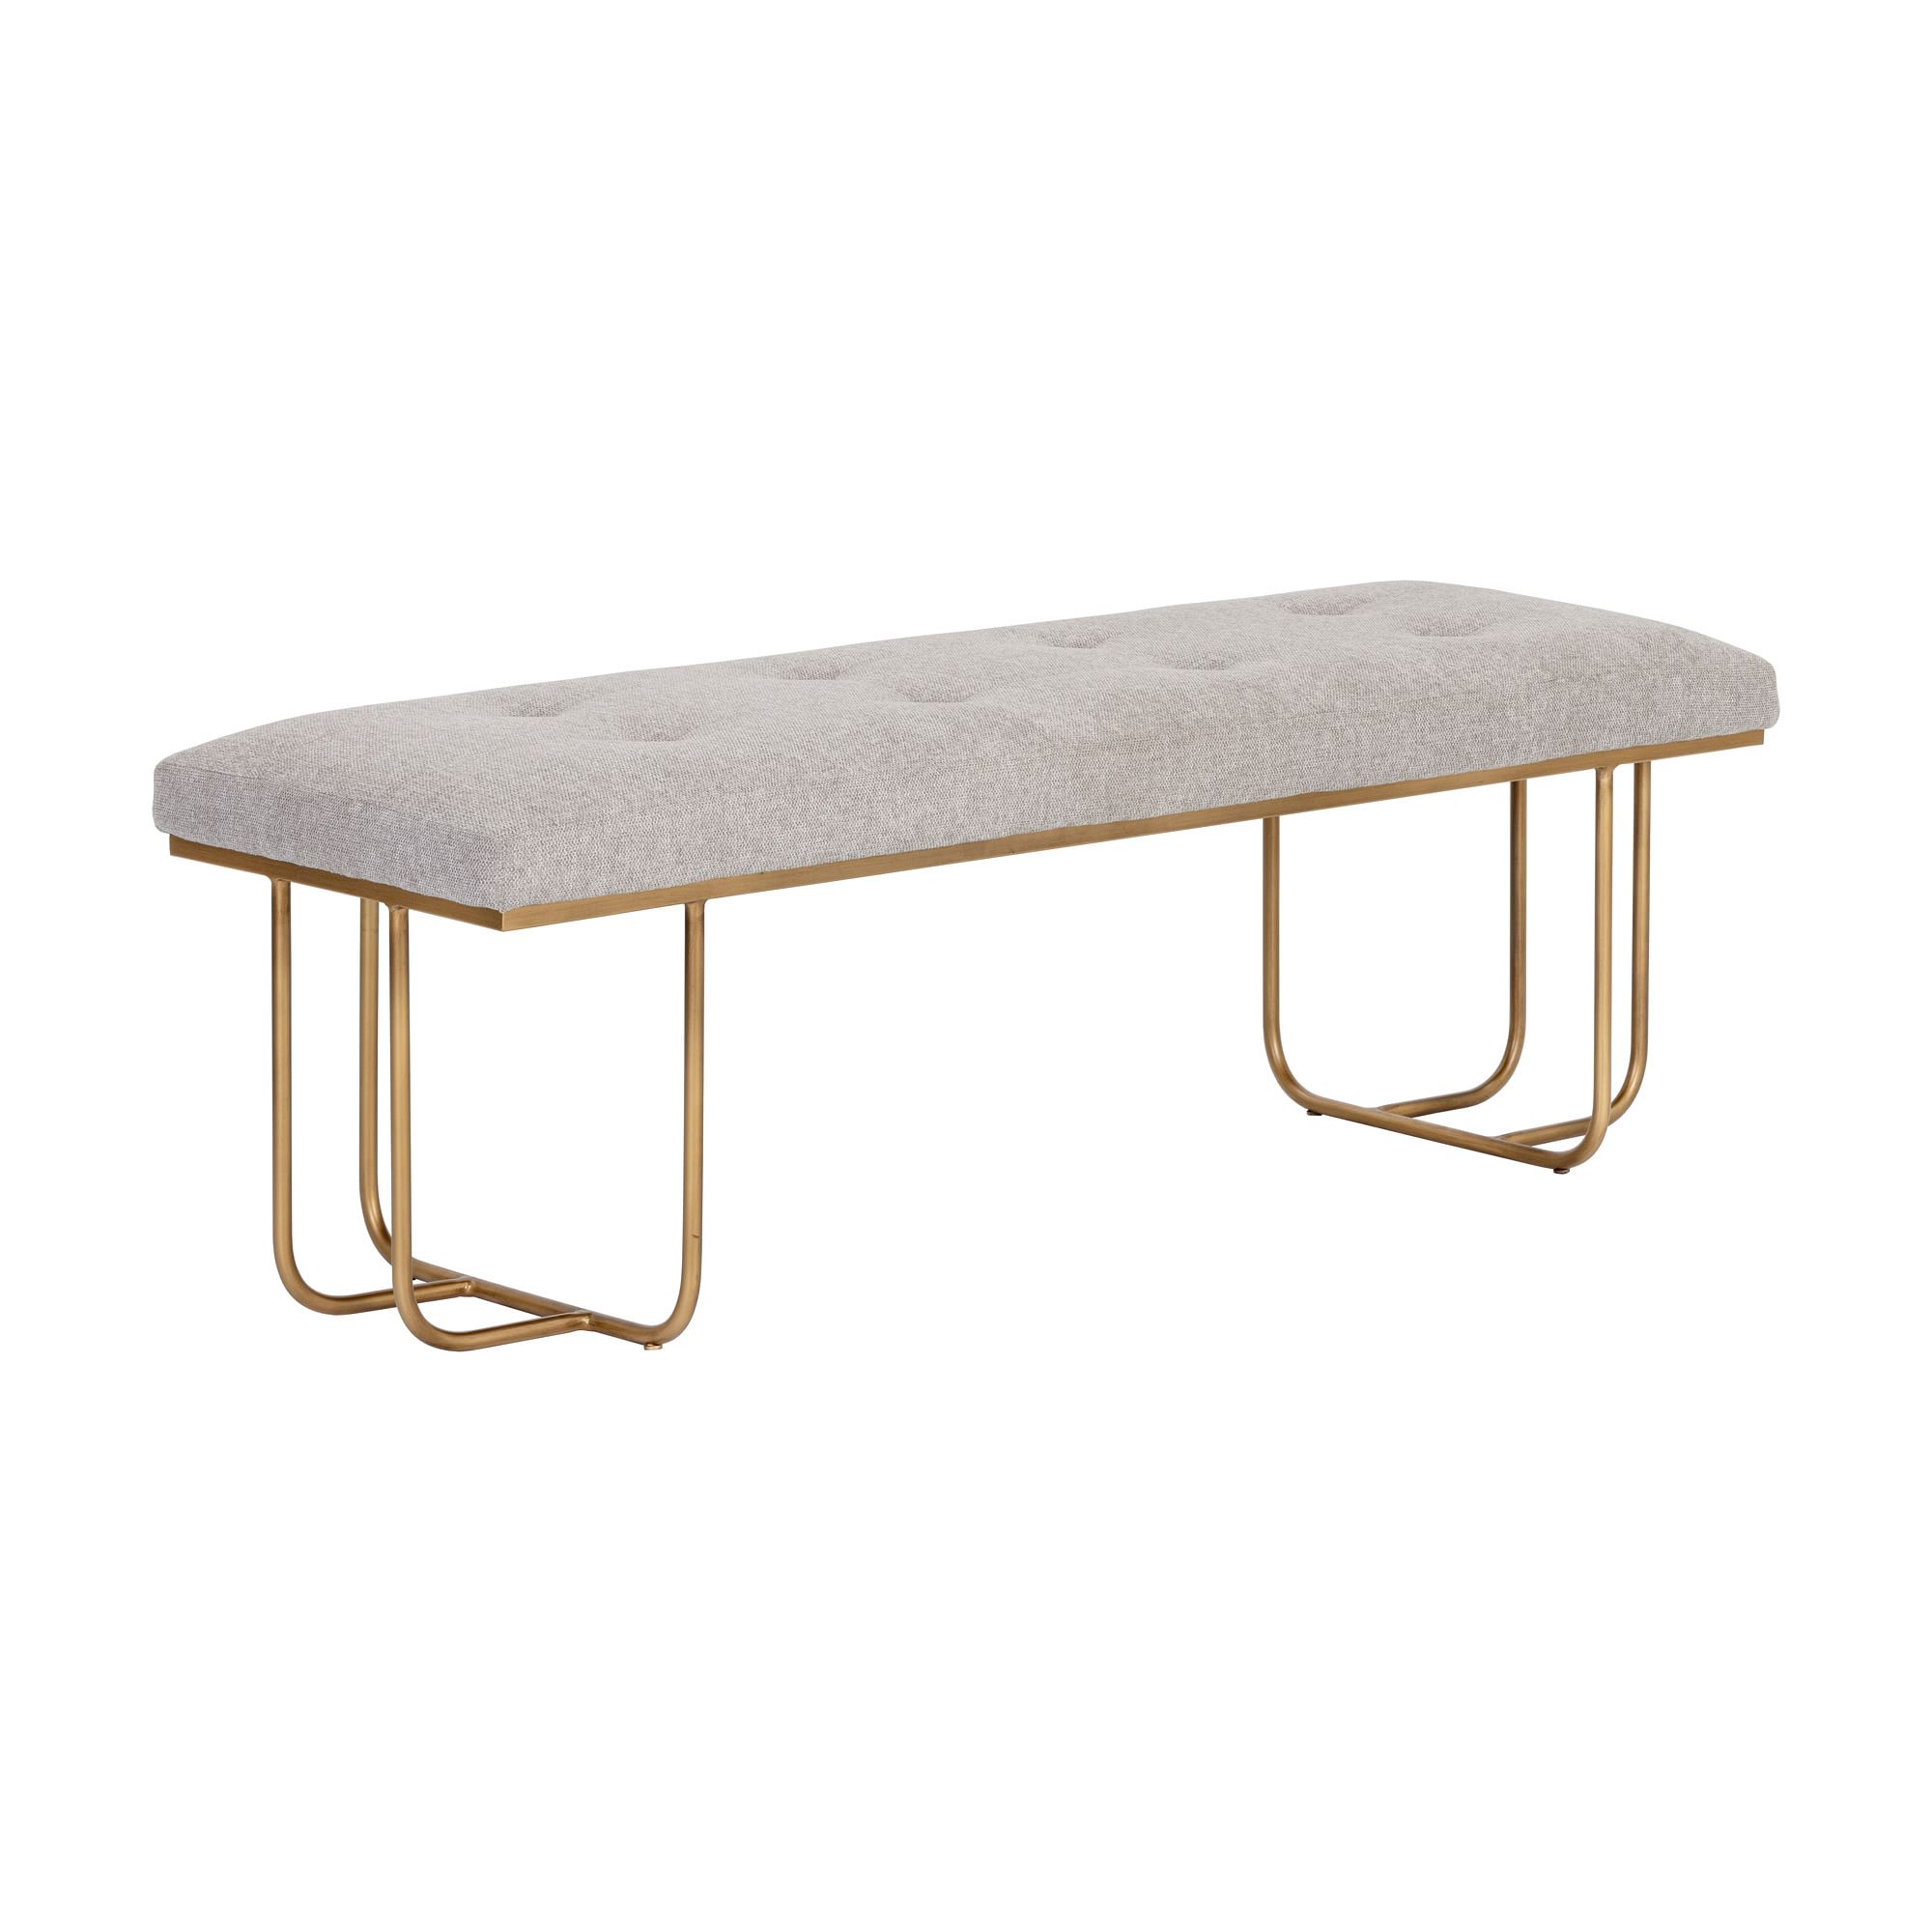 Two-Toned Upholstered Bench | West Elm